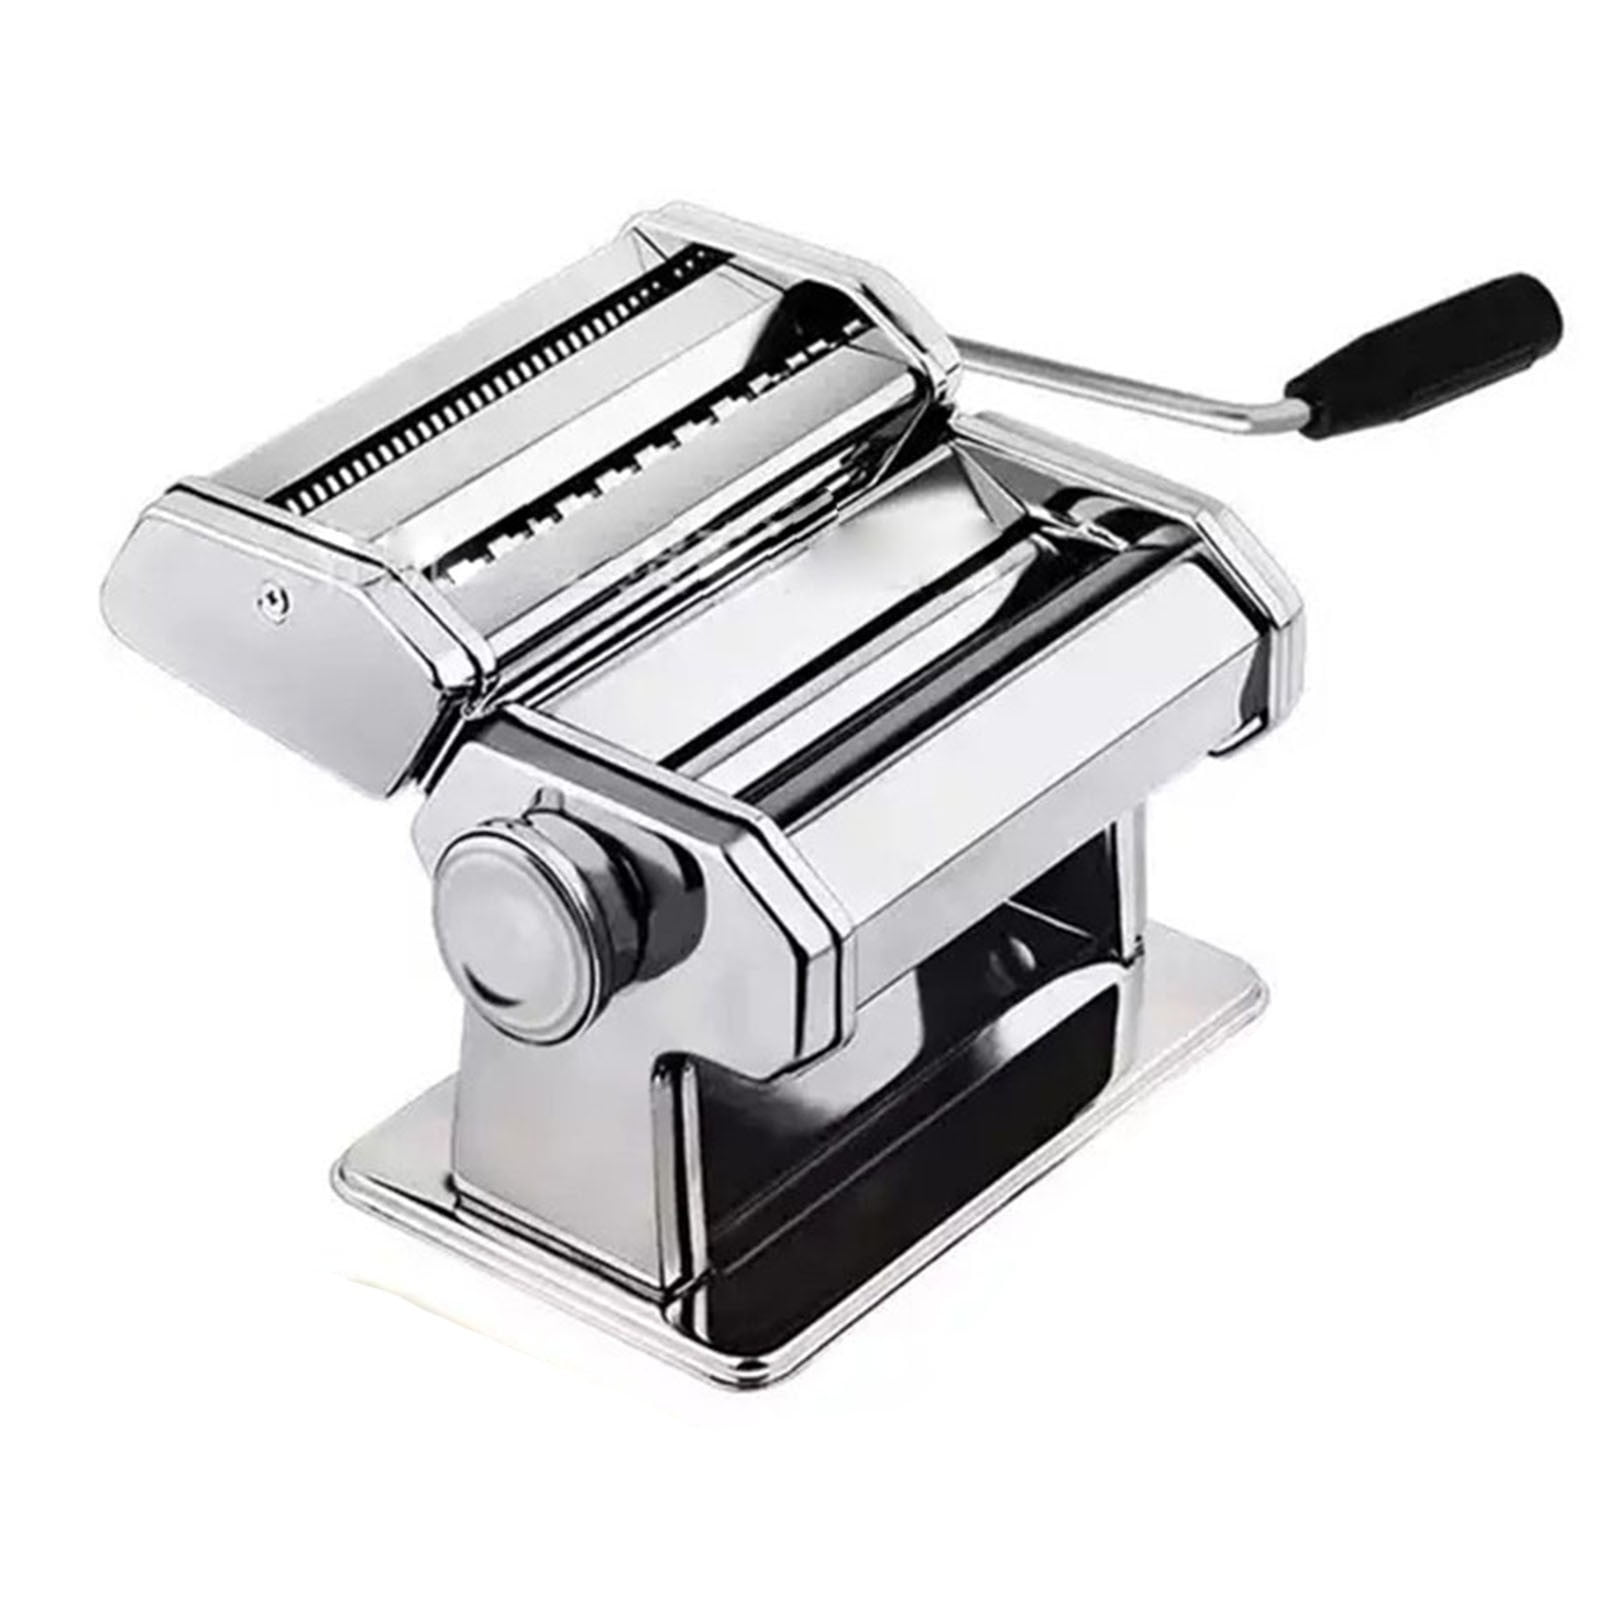 Home & Commercial Stainless Steel Manual Noodles Pasta Maker – GOOGmachine